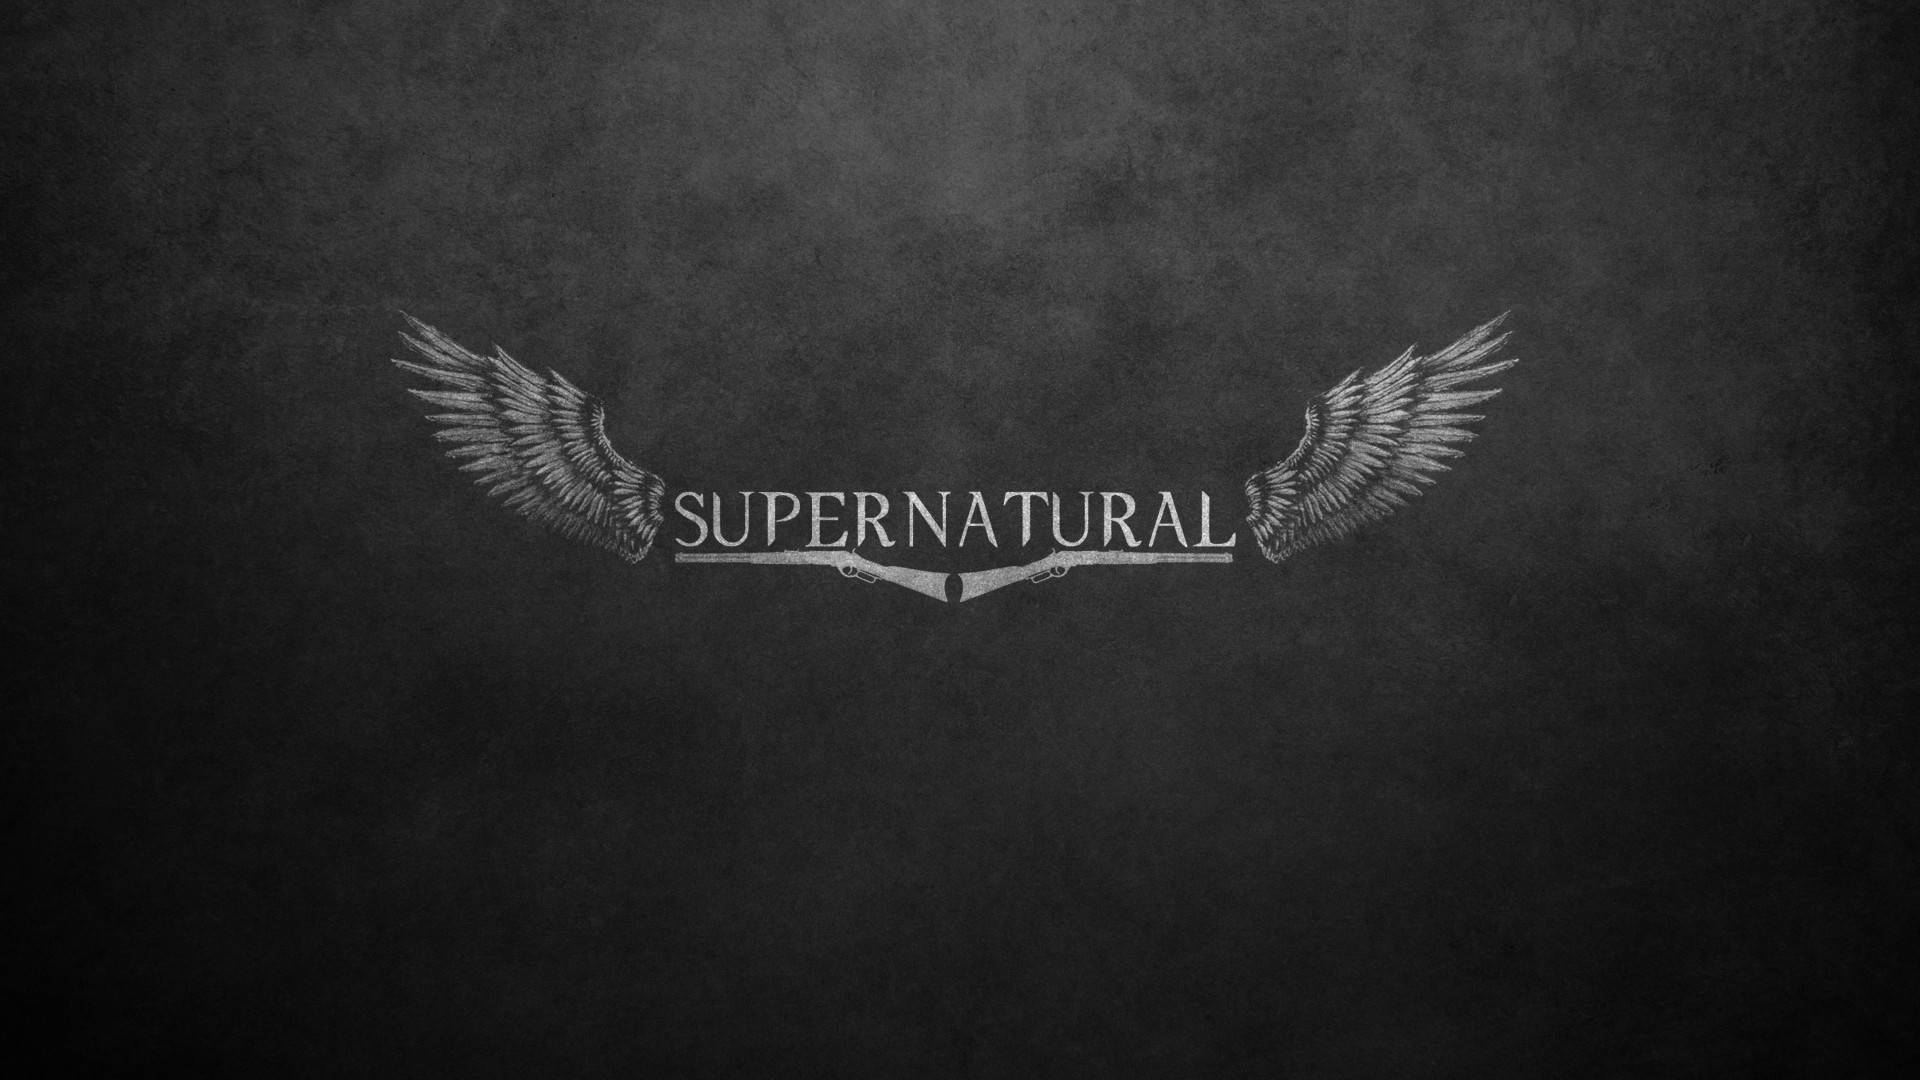 "Face Your Destiny with Supernatural - Fight Fear with Courage" Wallpaper